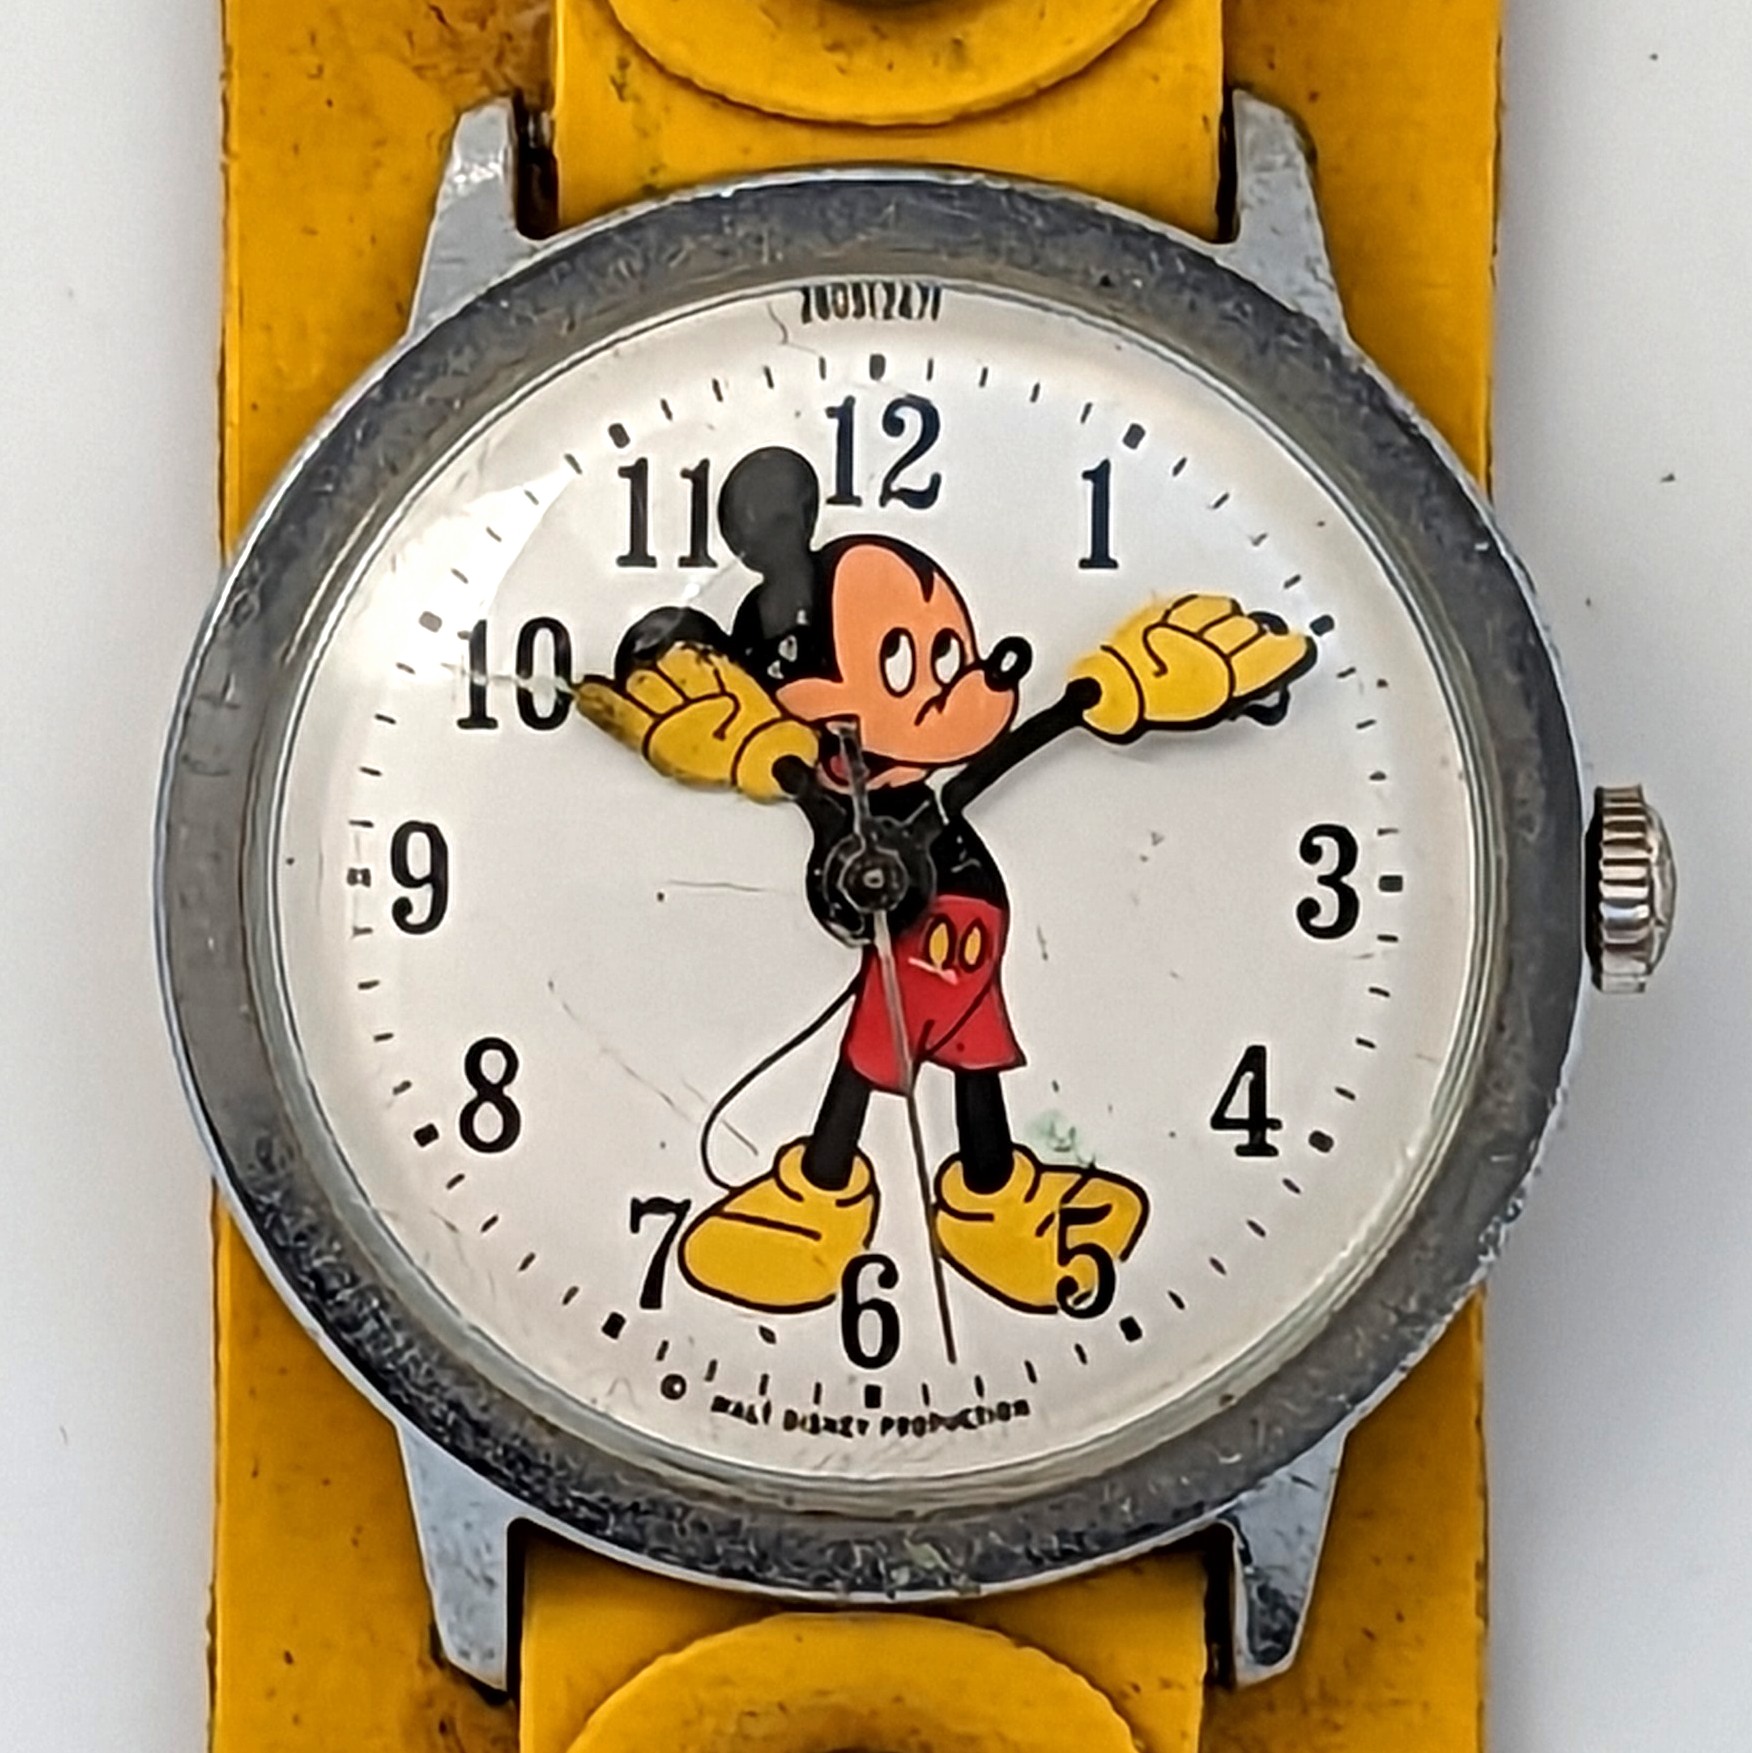 Timex Mickey Mouse Watch 26051 2471 [1971] Fun Timer / Marlin